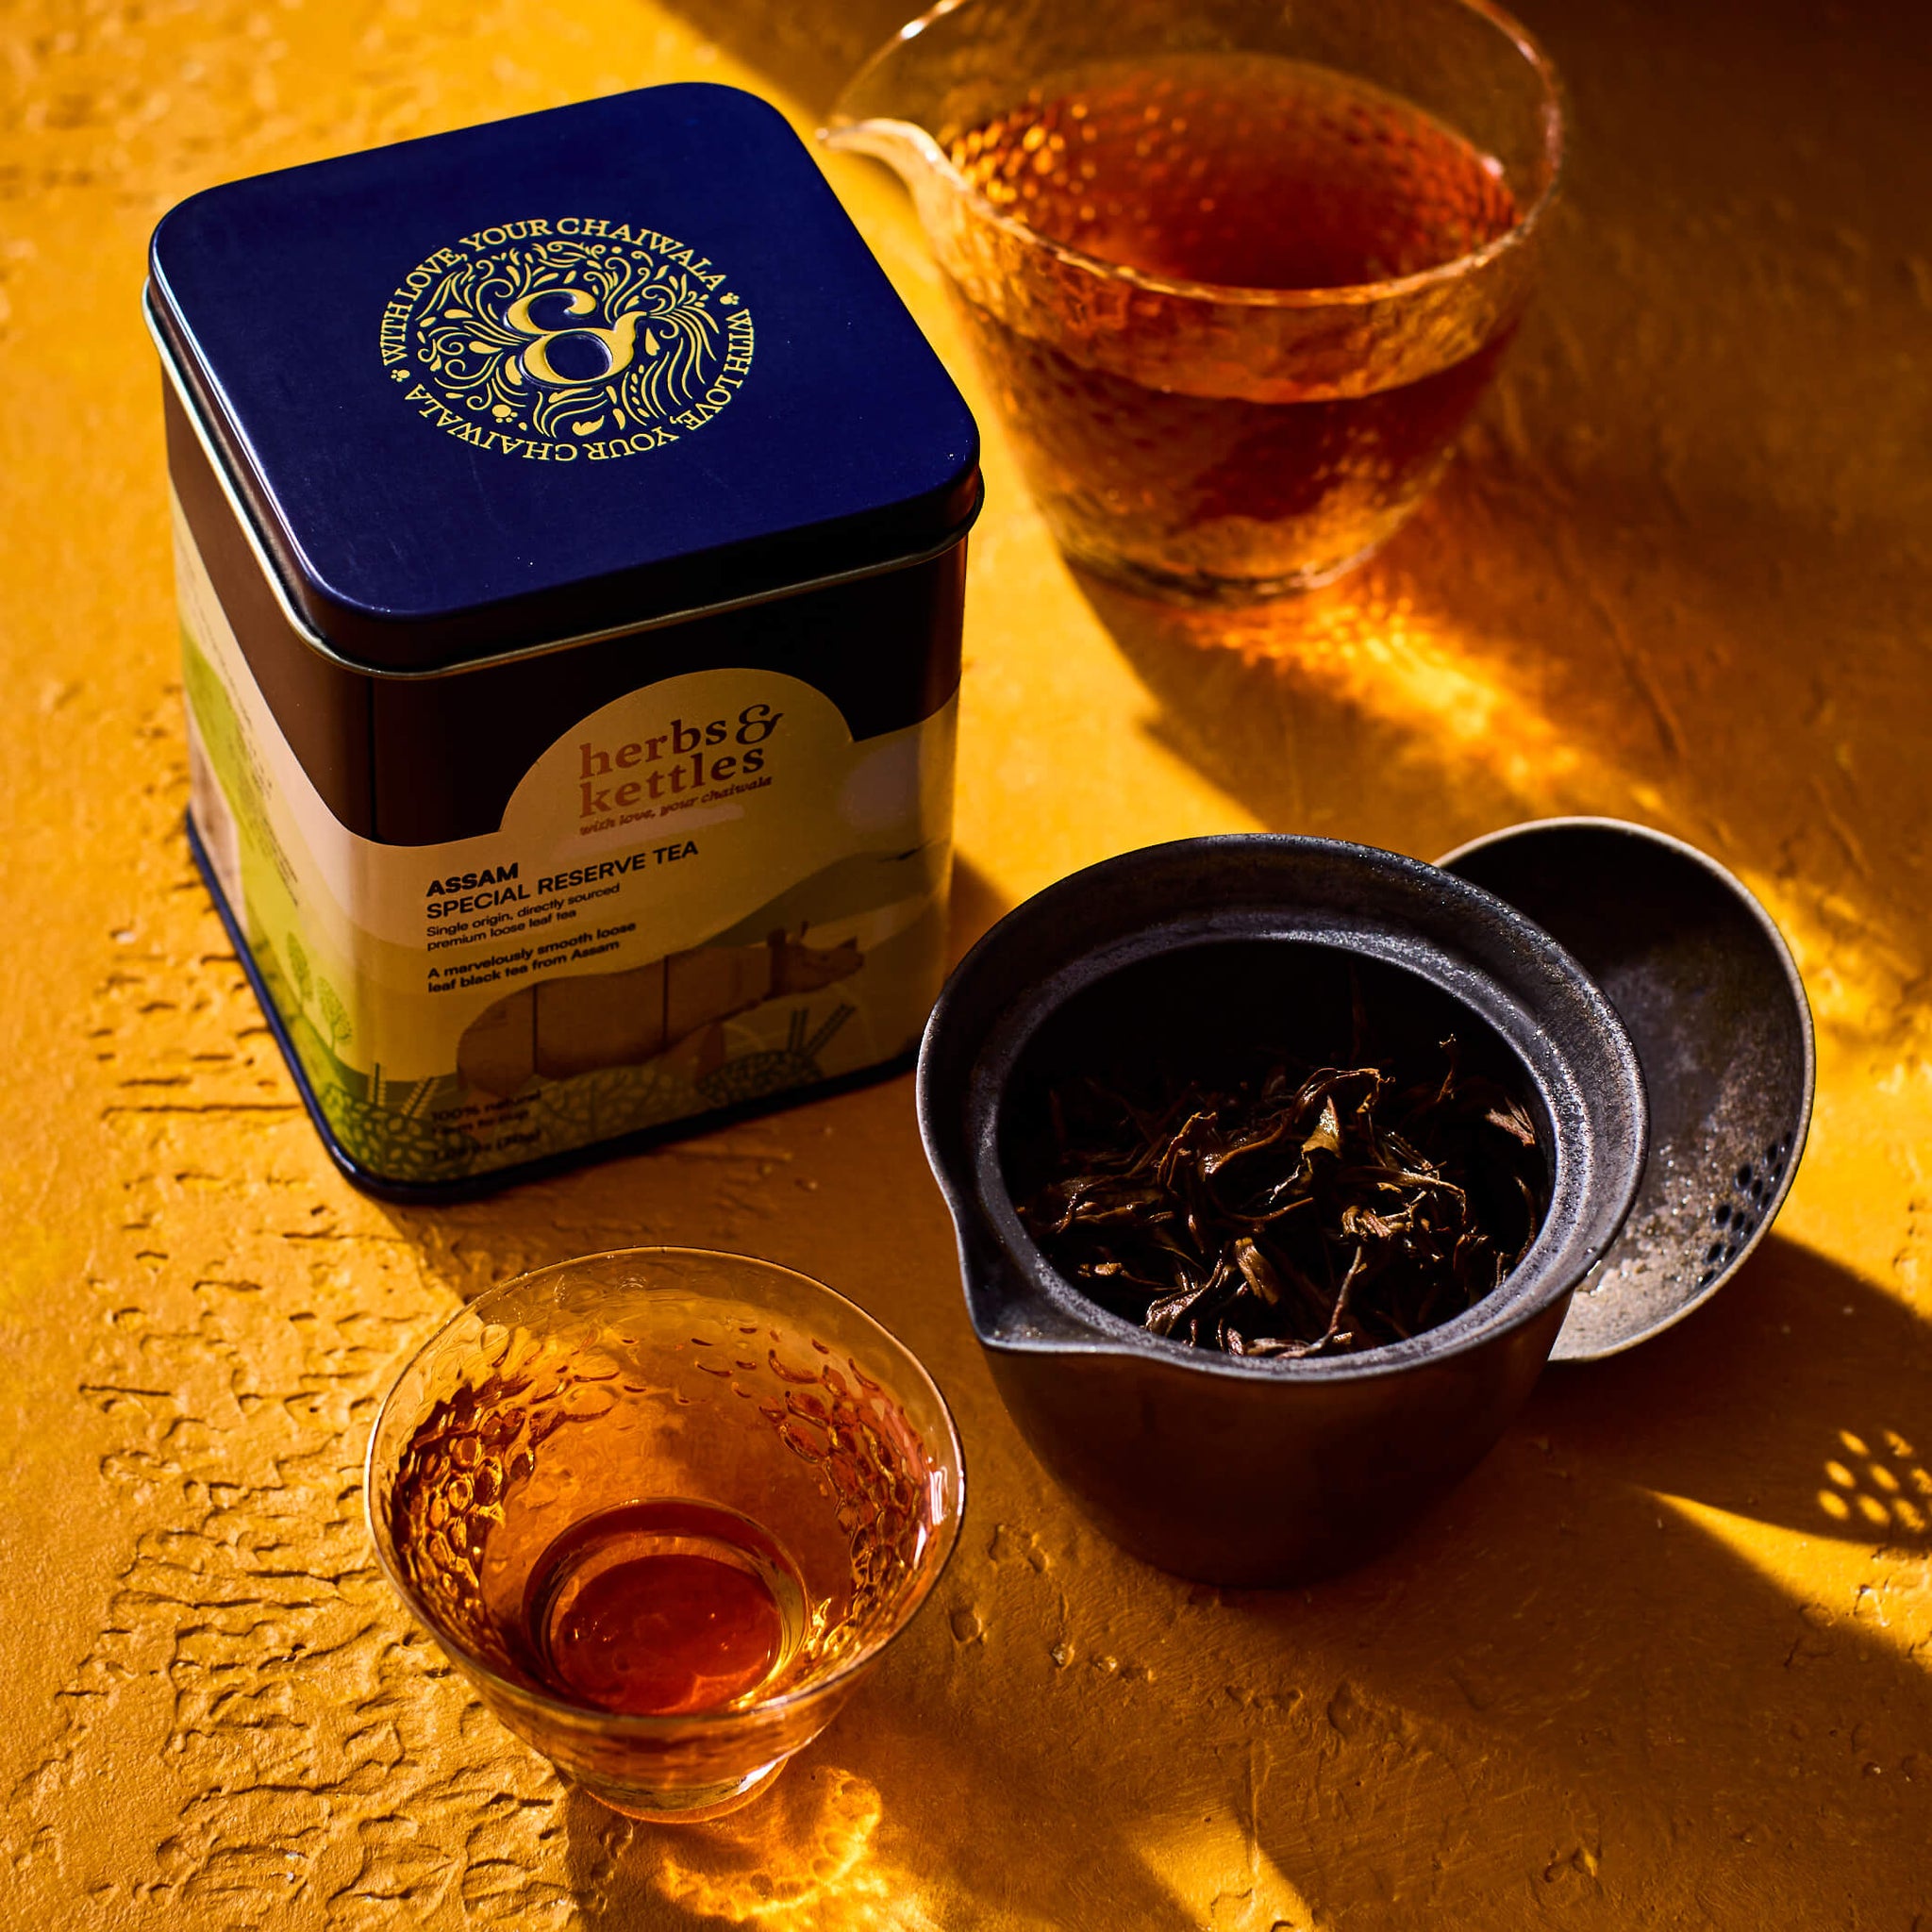 a tin of Assam Special Reserve with loose leaf next to the glass of Assam Special Reserve tea